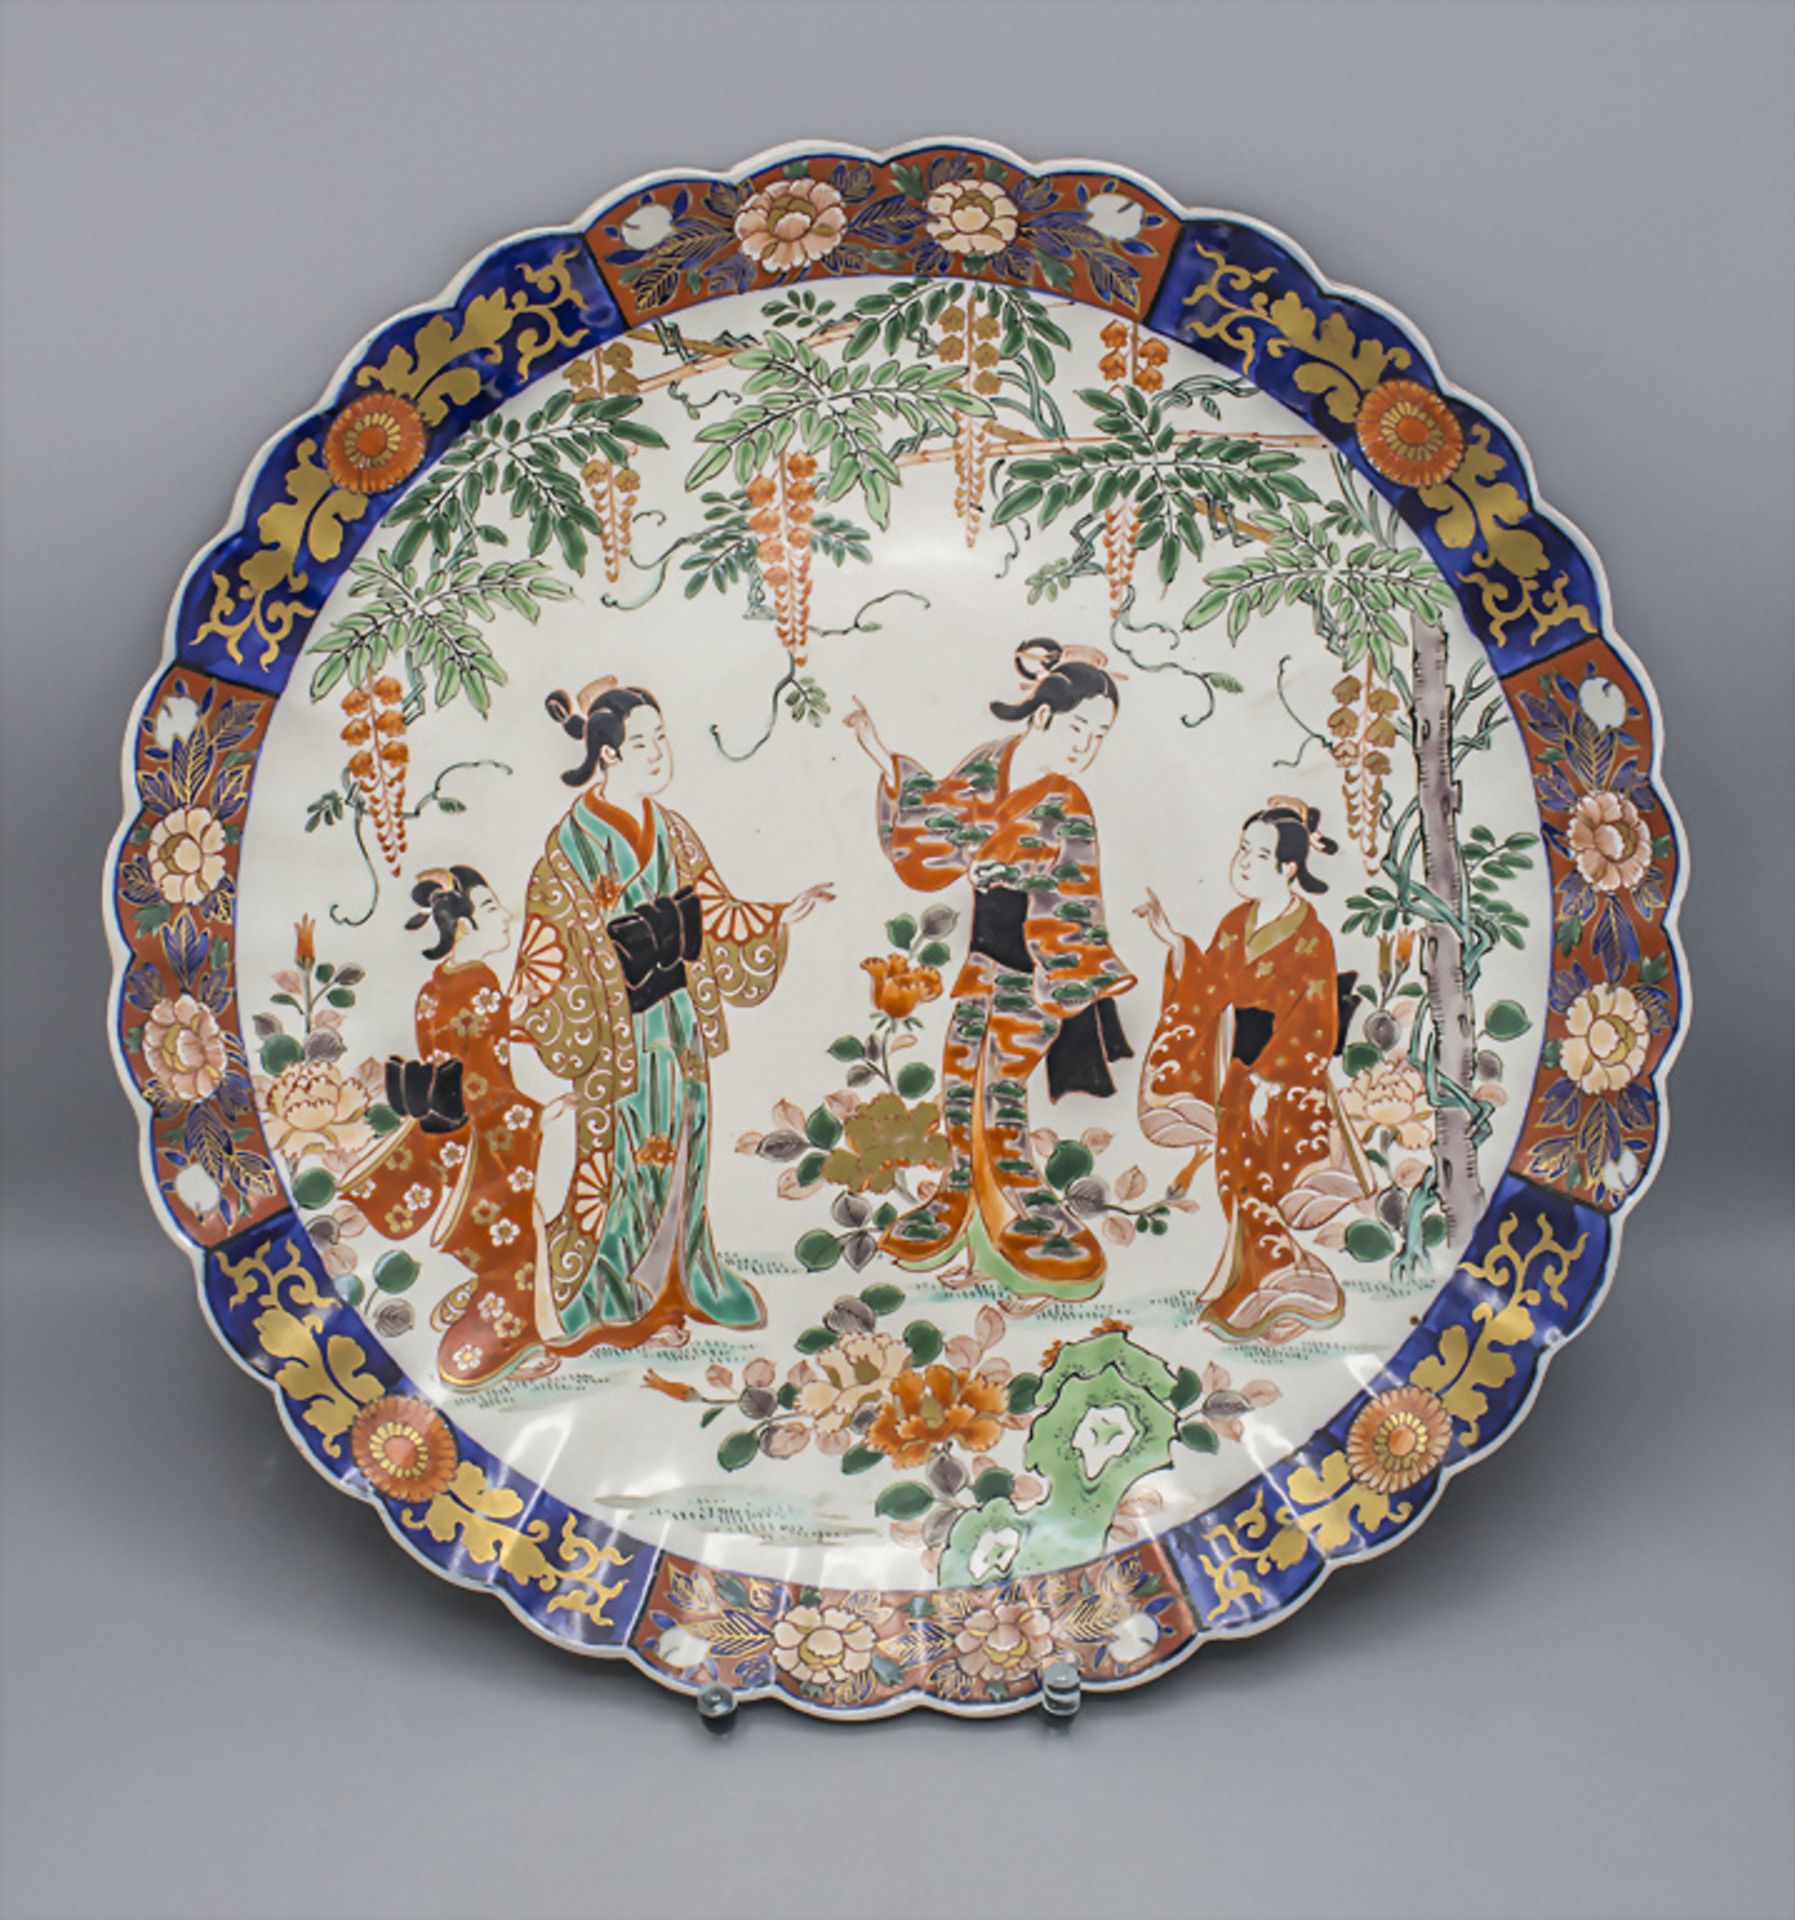 Großer Teller / A large plate, wohl Famille Rose, wohl China, 18. Jh.